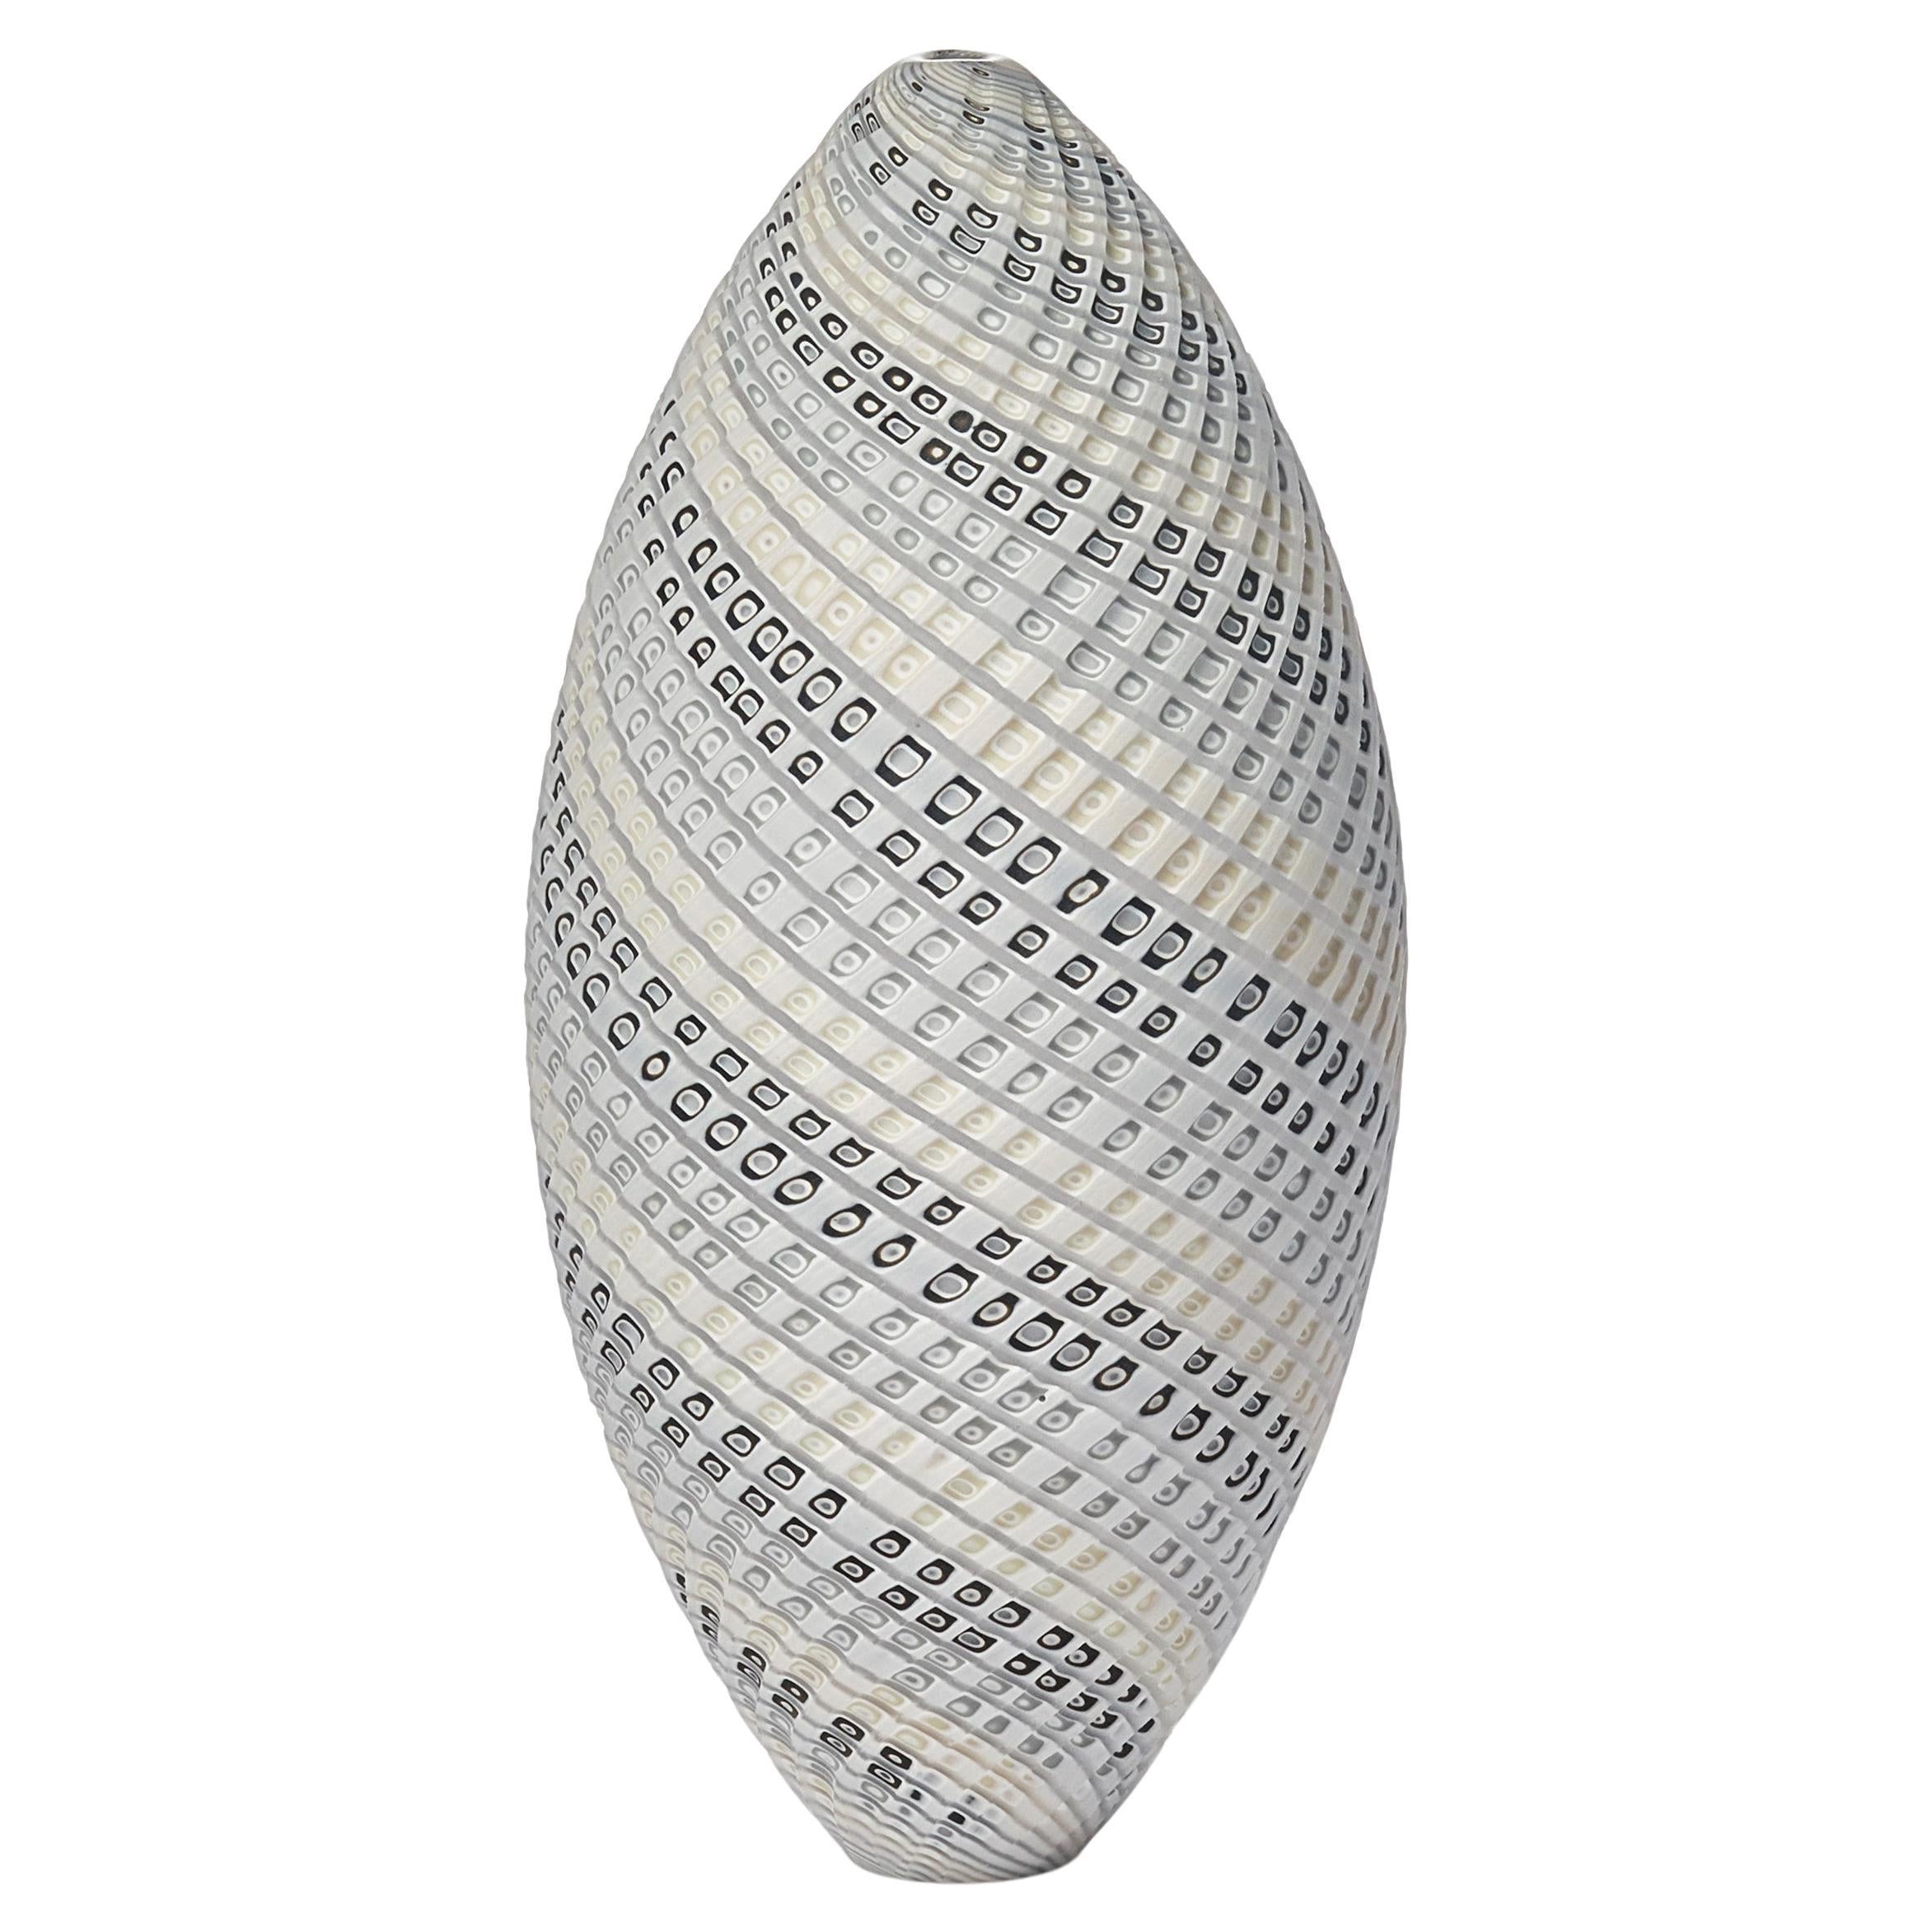 Woven Two Tone Ovoid (med), neutral pastel handblown glass vessel by Layne Rowe